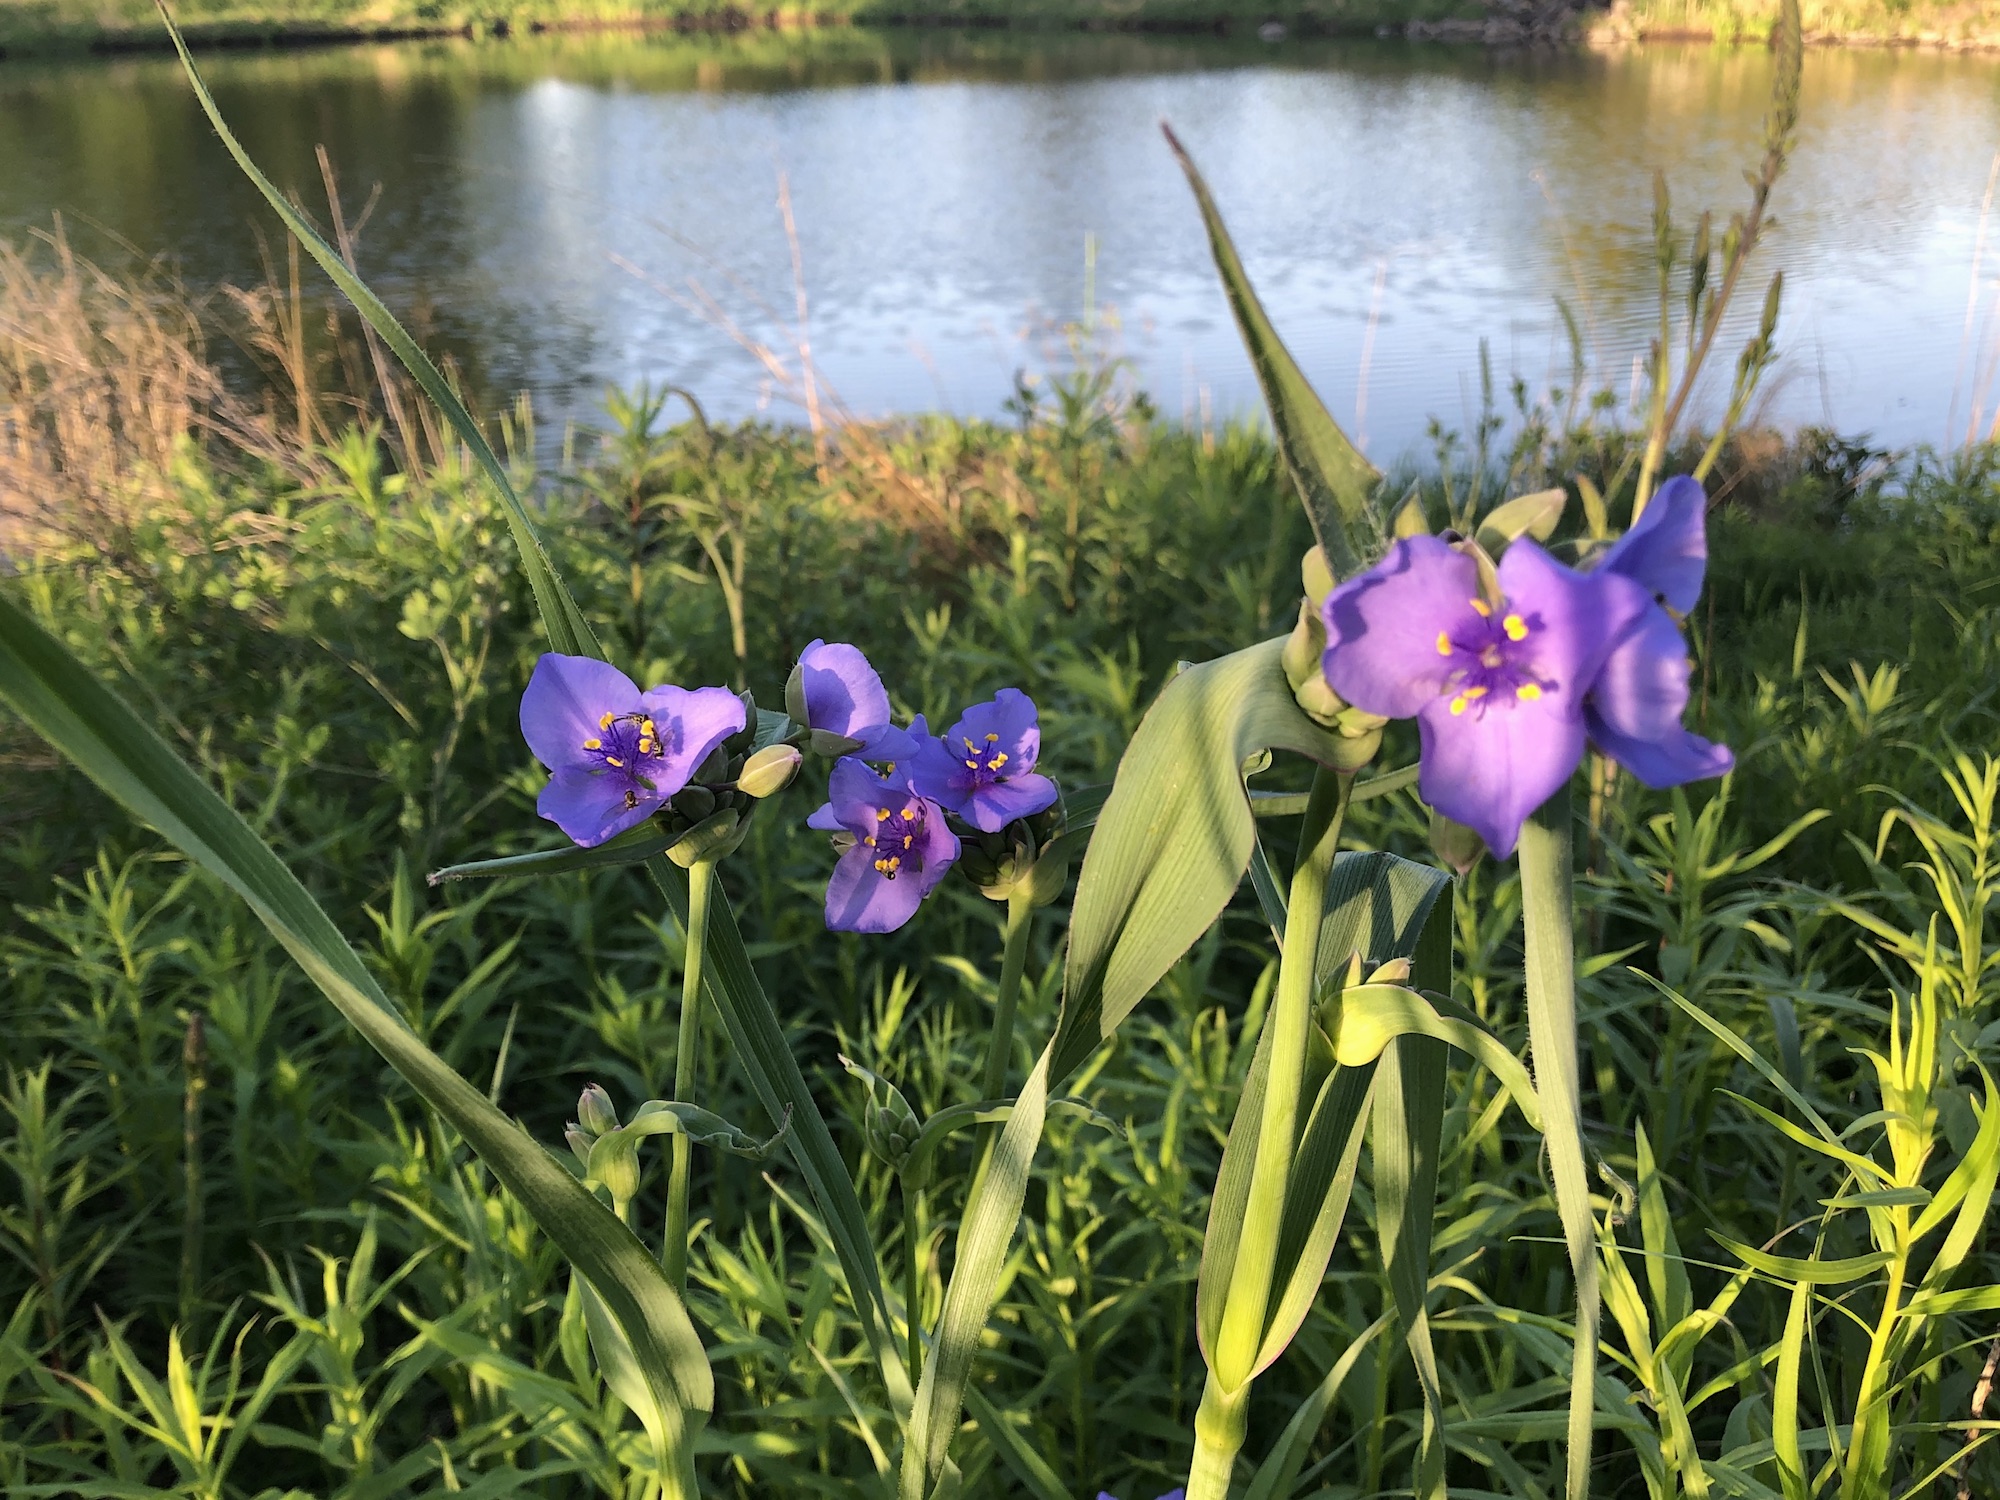 Spiderwort blooming on the bank of the retaining pond on June 2, 2020.